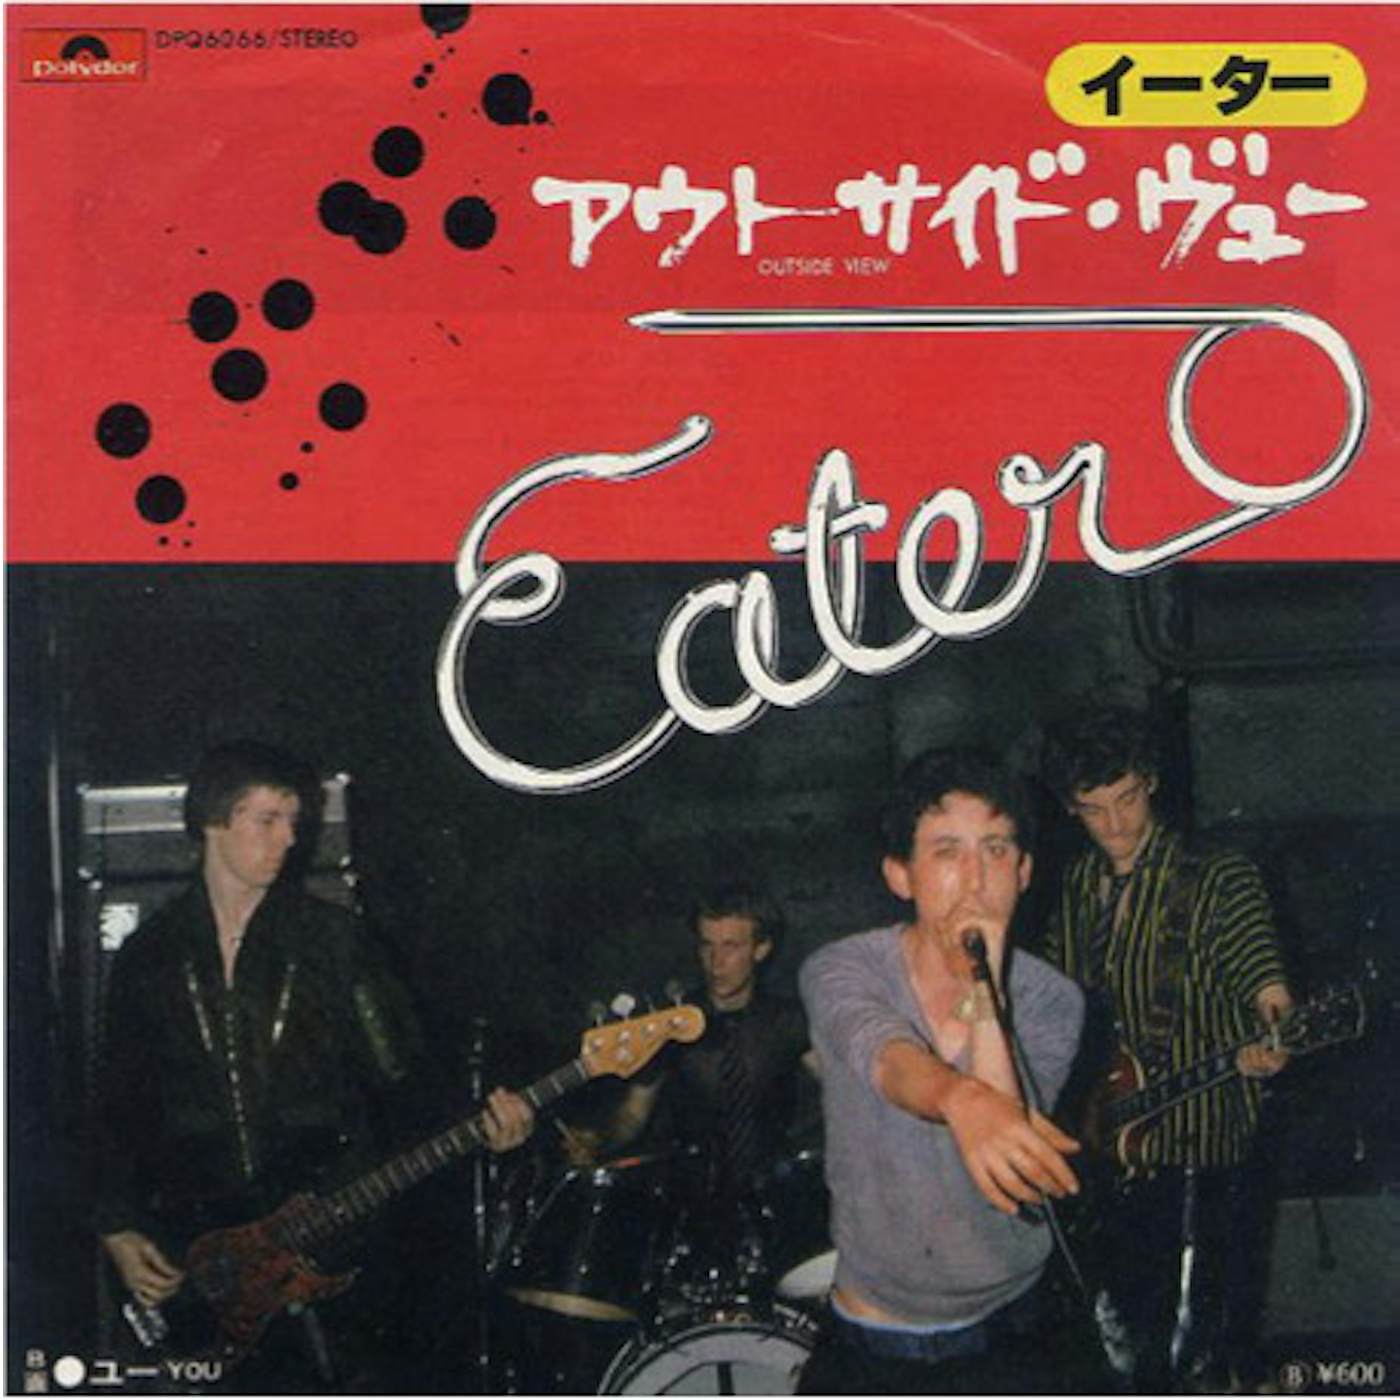 Eater OUTSIDE VIEW Vinyl Record